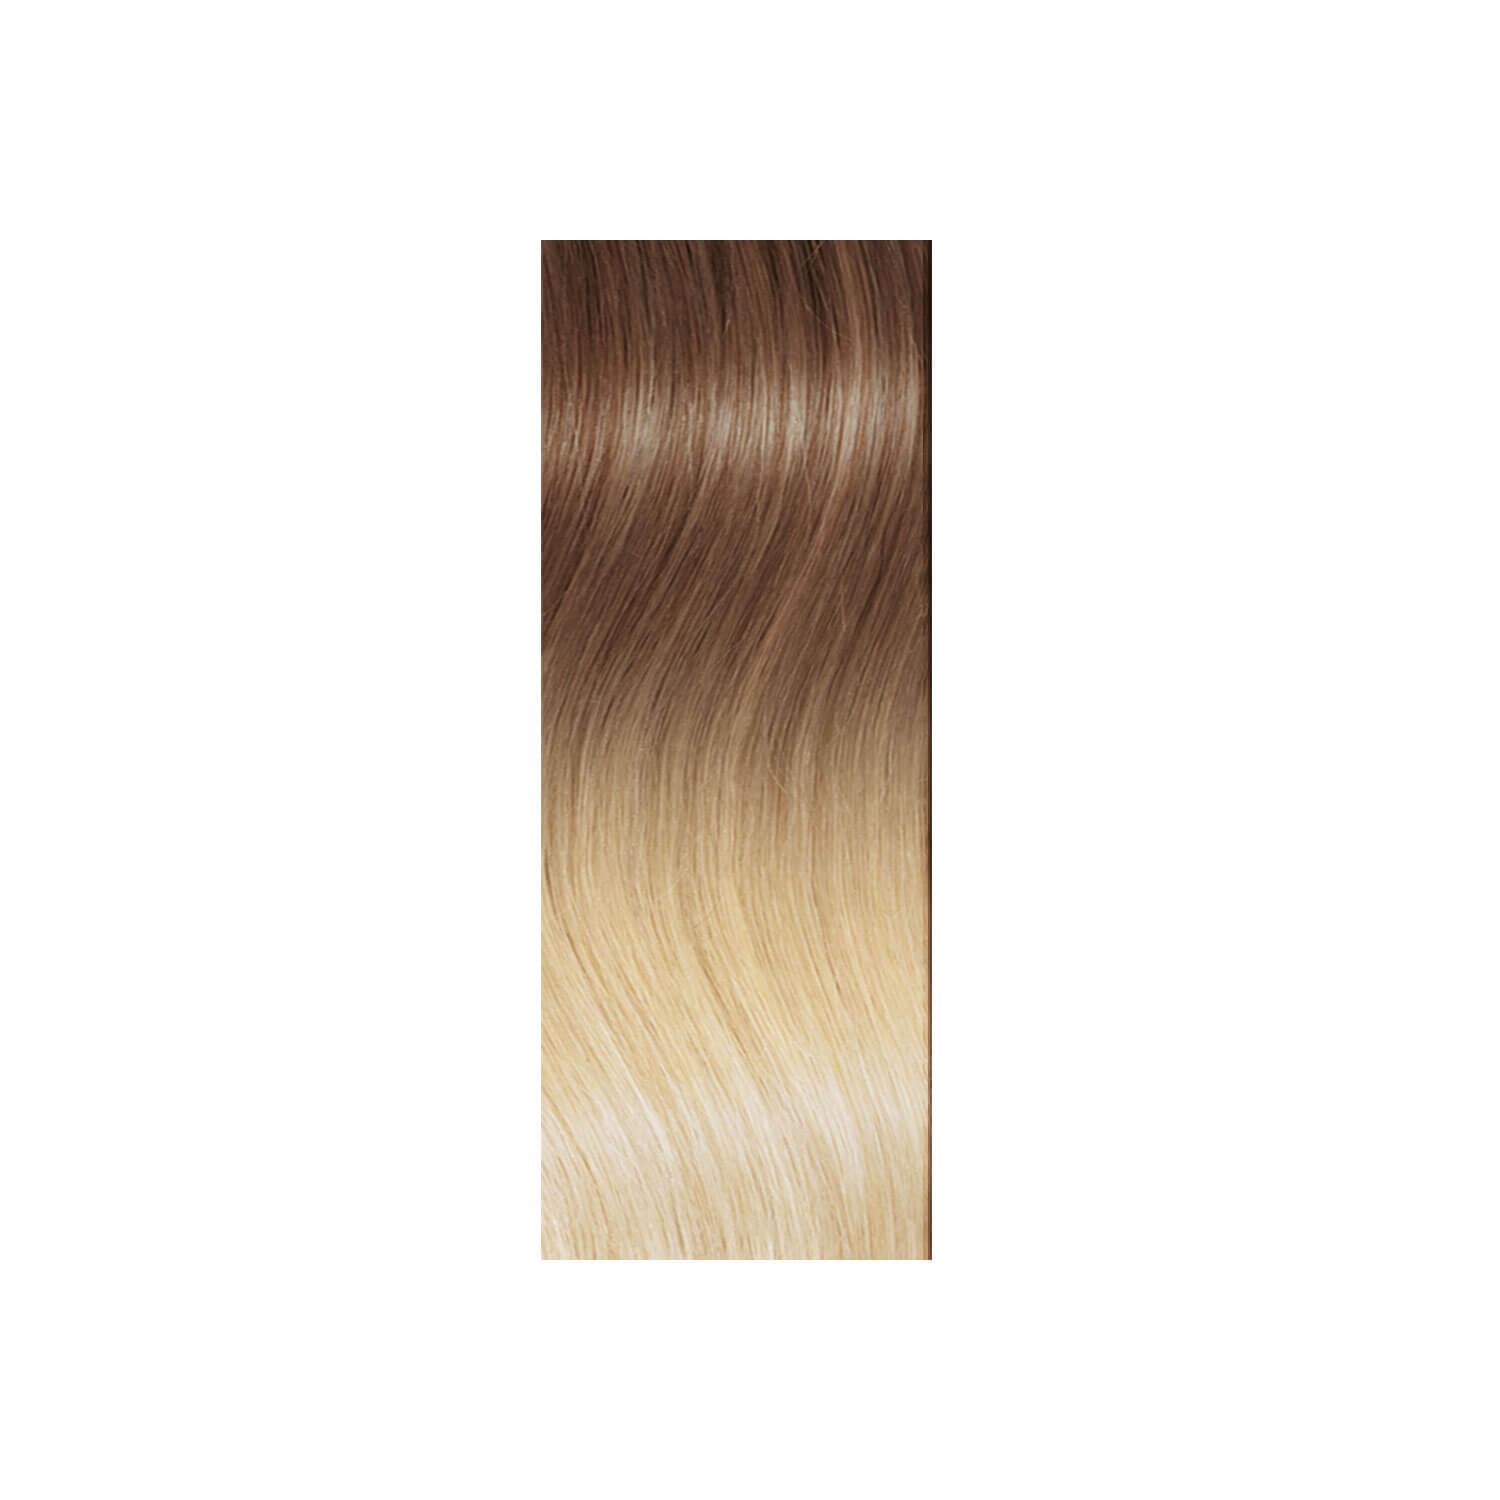 SHE Bonding-System Hair Extensions Straight Ombré - T14/1001 Natürliches Hellblond/Sehr helles Plati